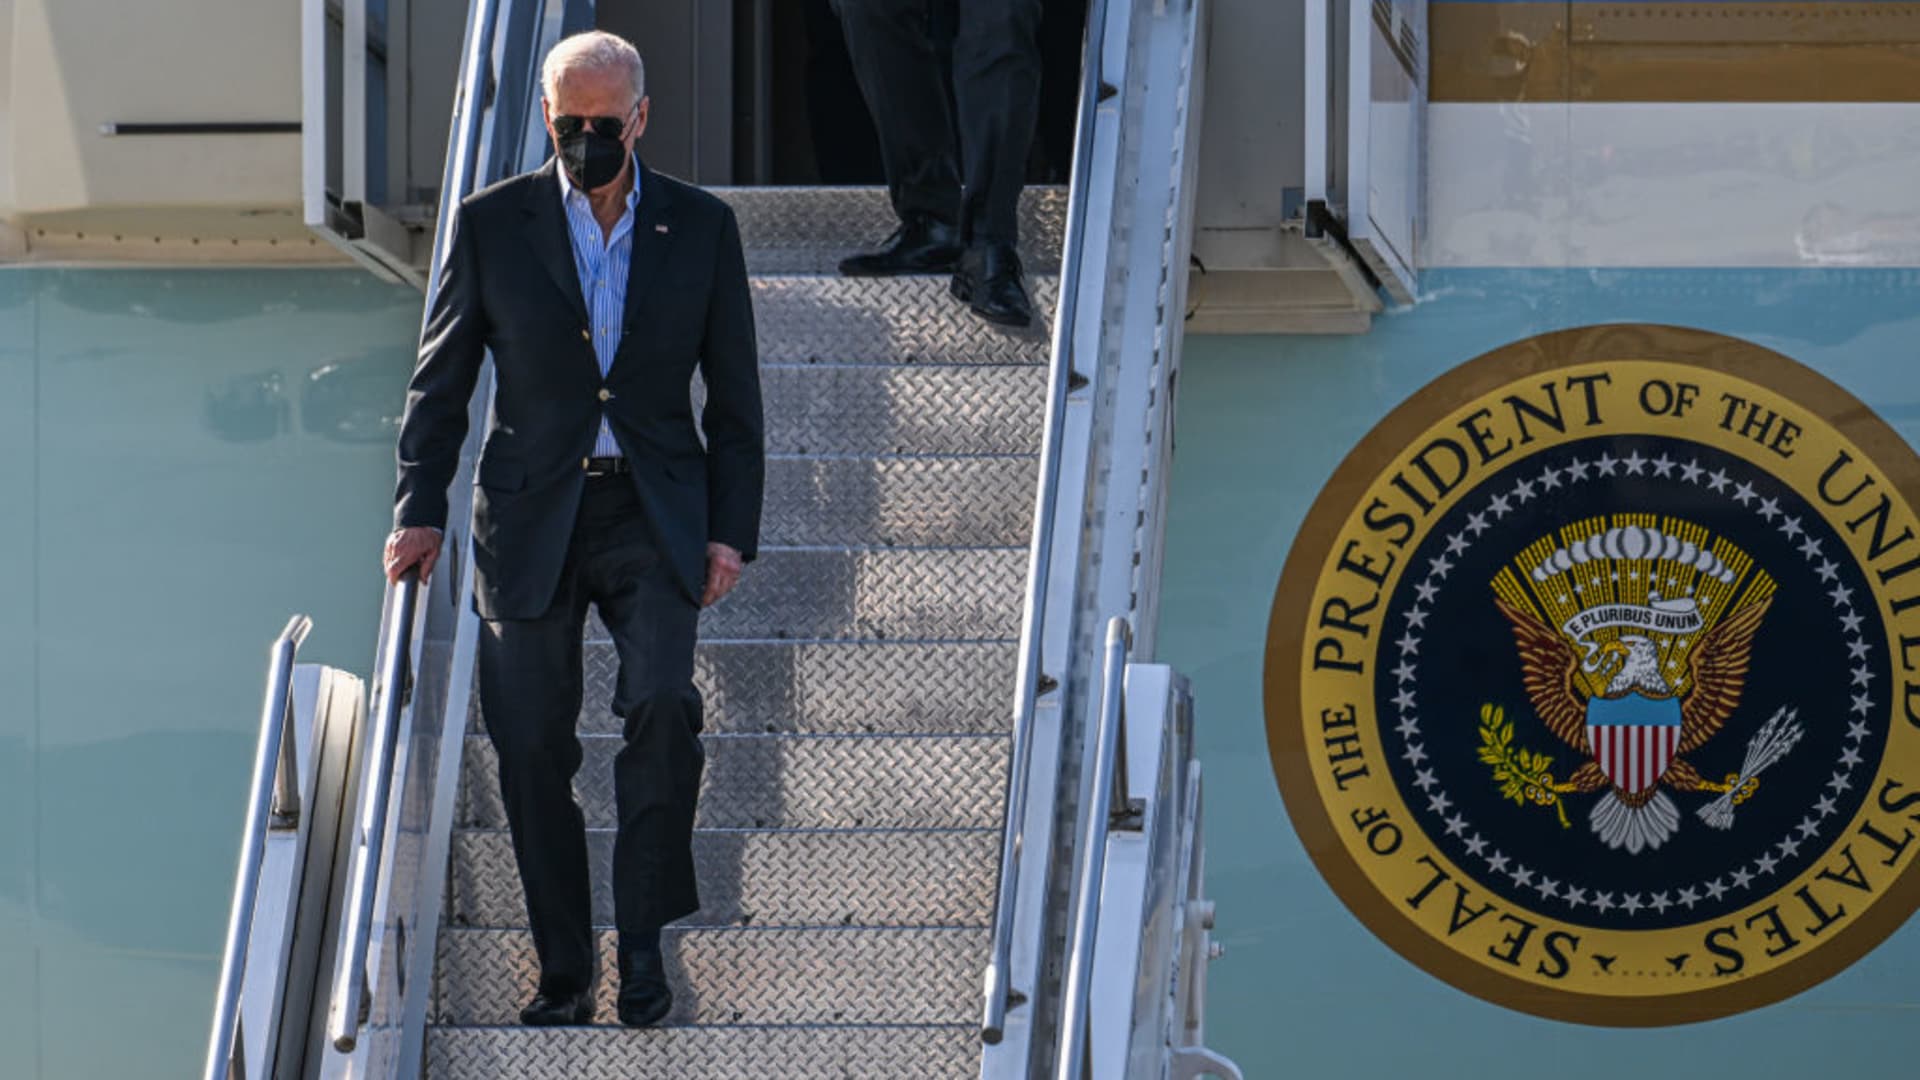 US. President Joe Biden disembarks Air Force One at Rzeszow Airport on March 25, 2022 in Rzeszow, Poland.